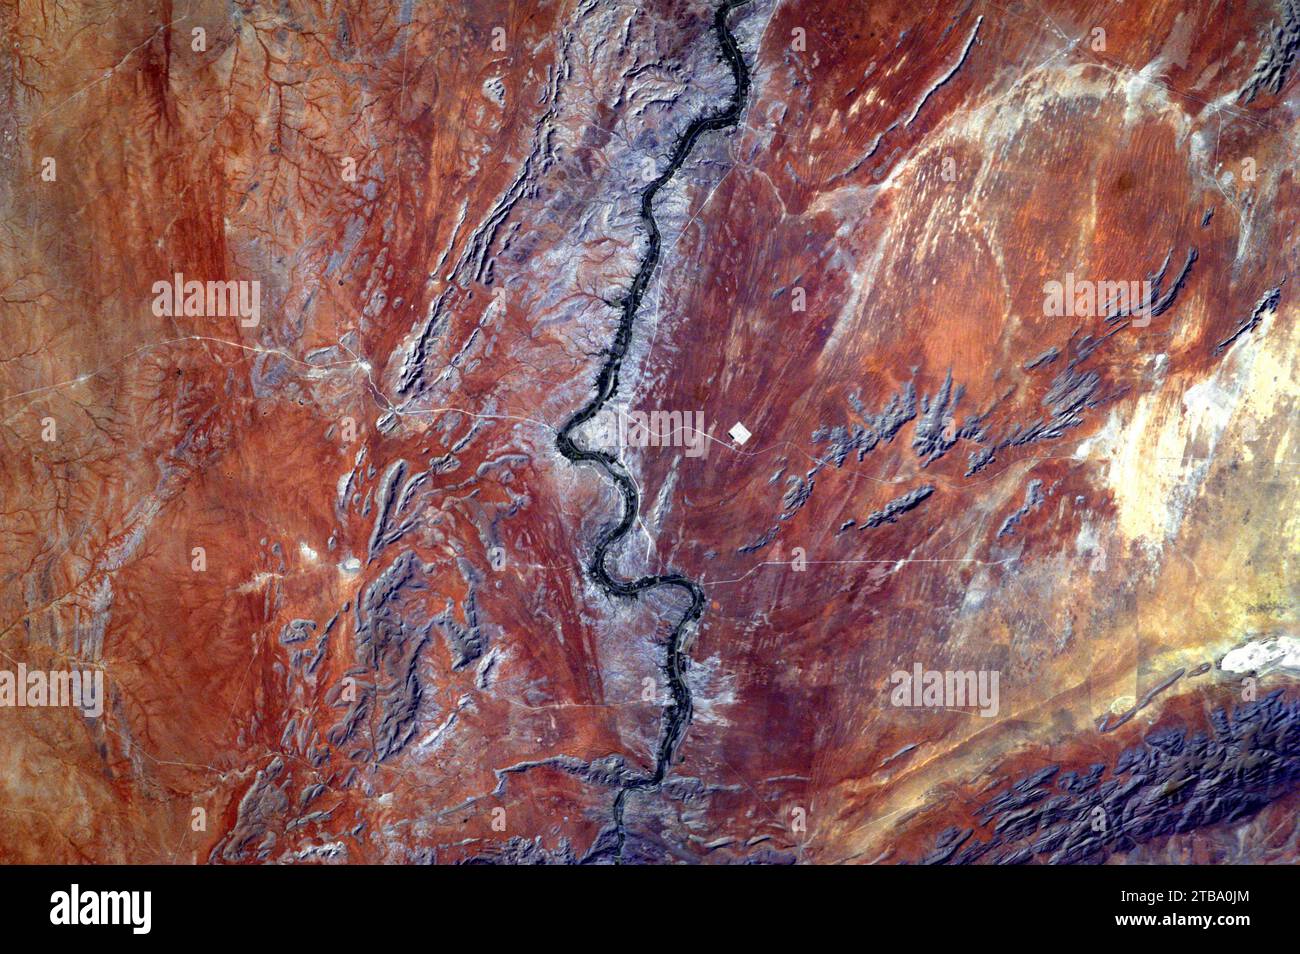 View from space of sand dunes, ancient rocks and the Orange River in the Kalahari Desert, Africa. Stock Photo